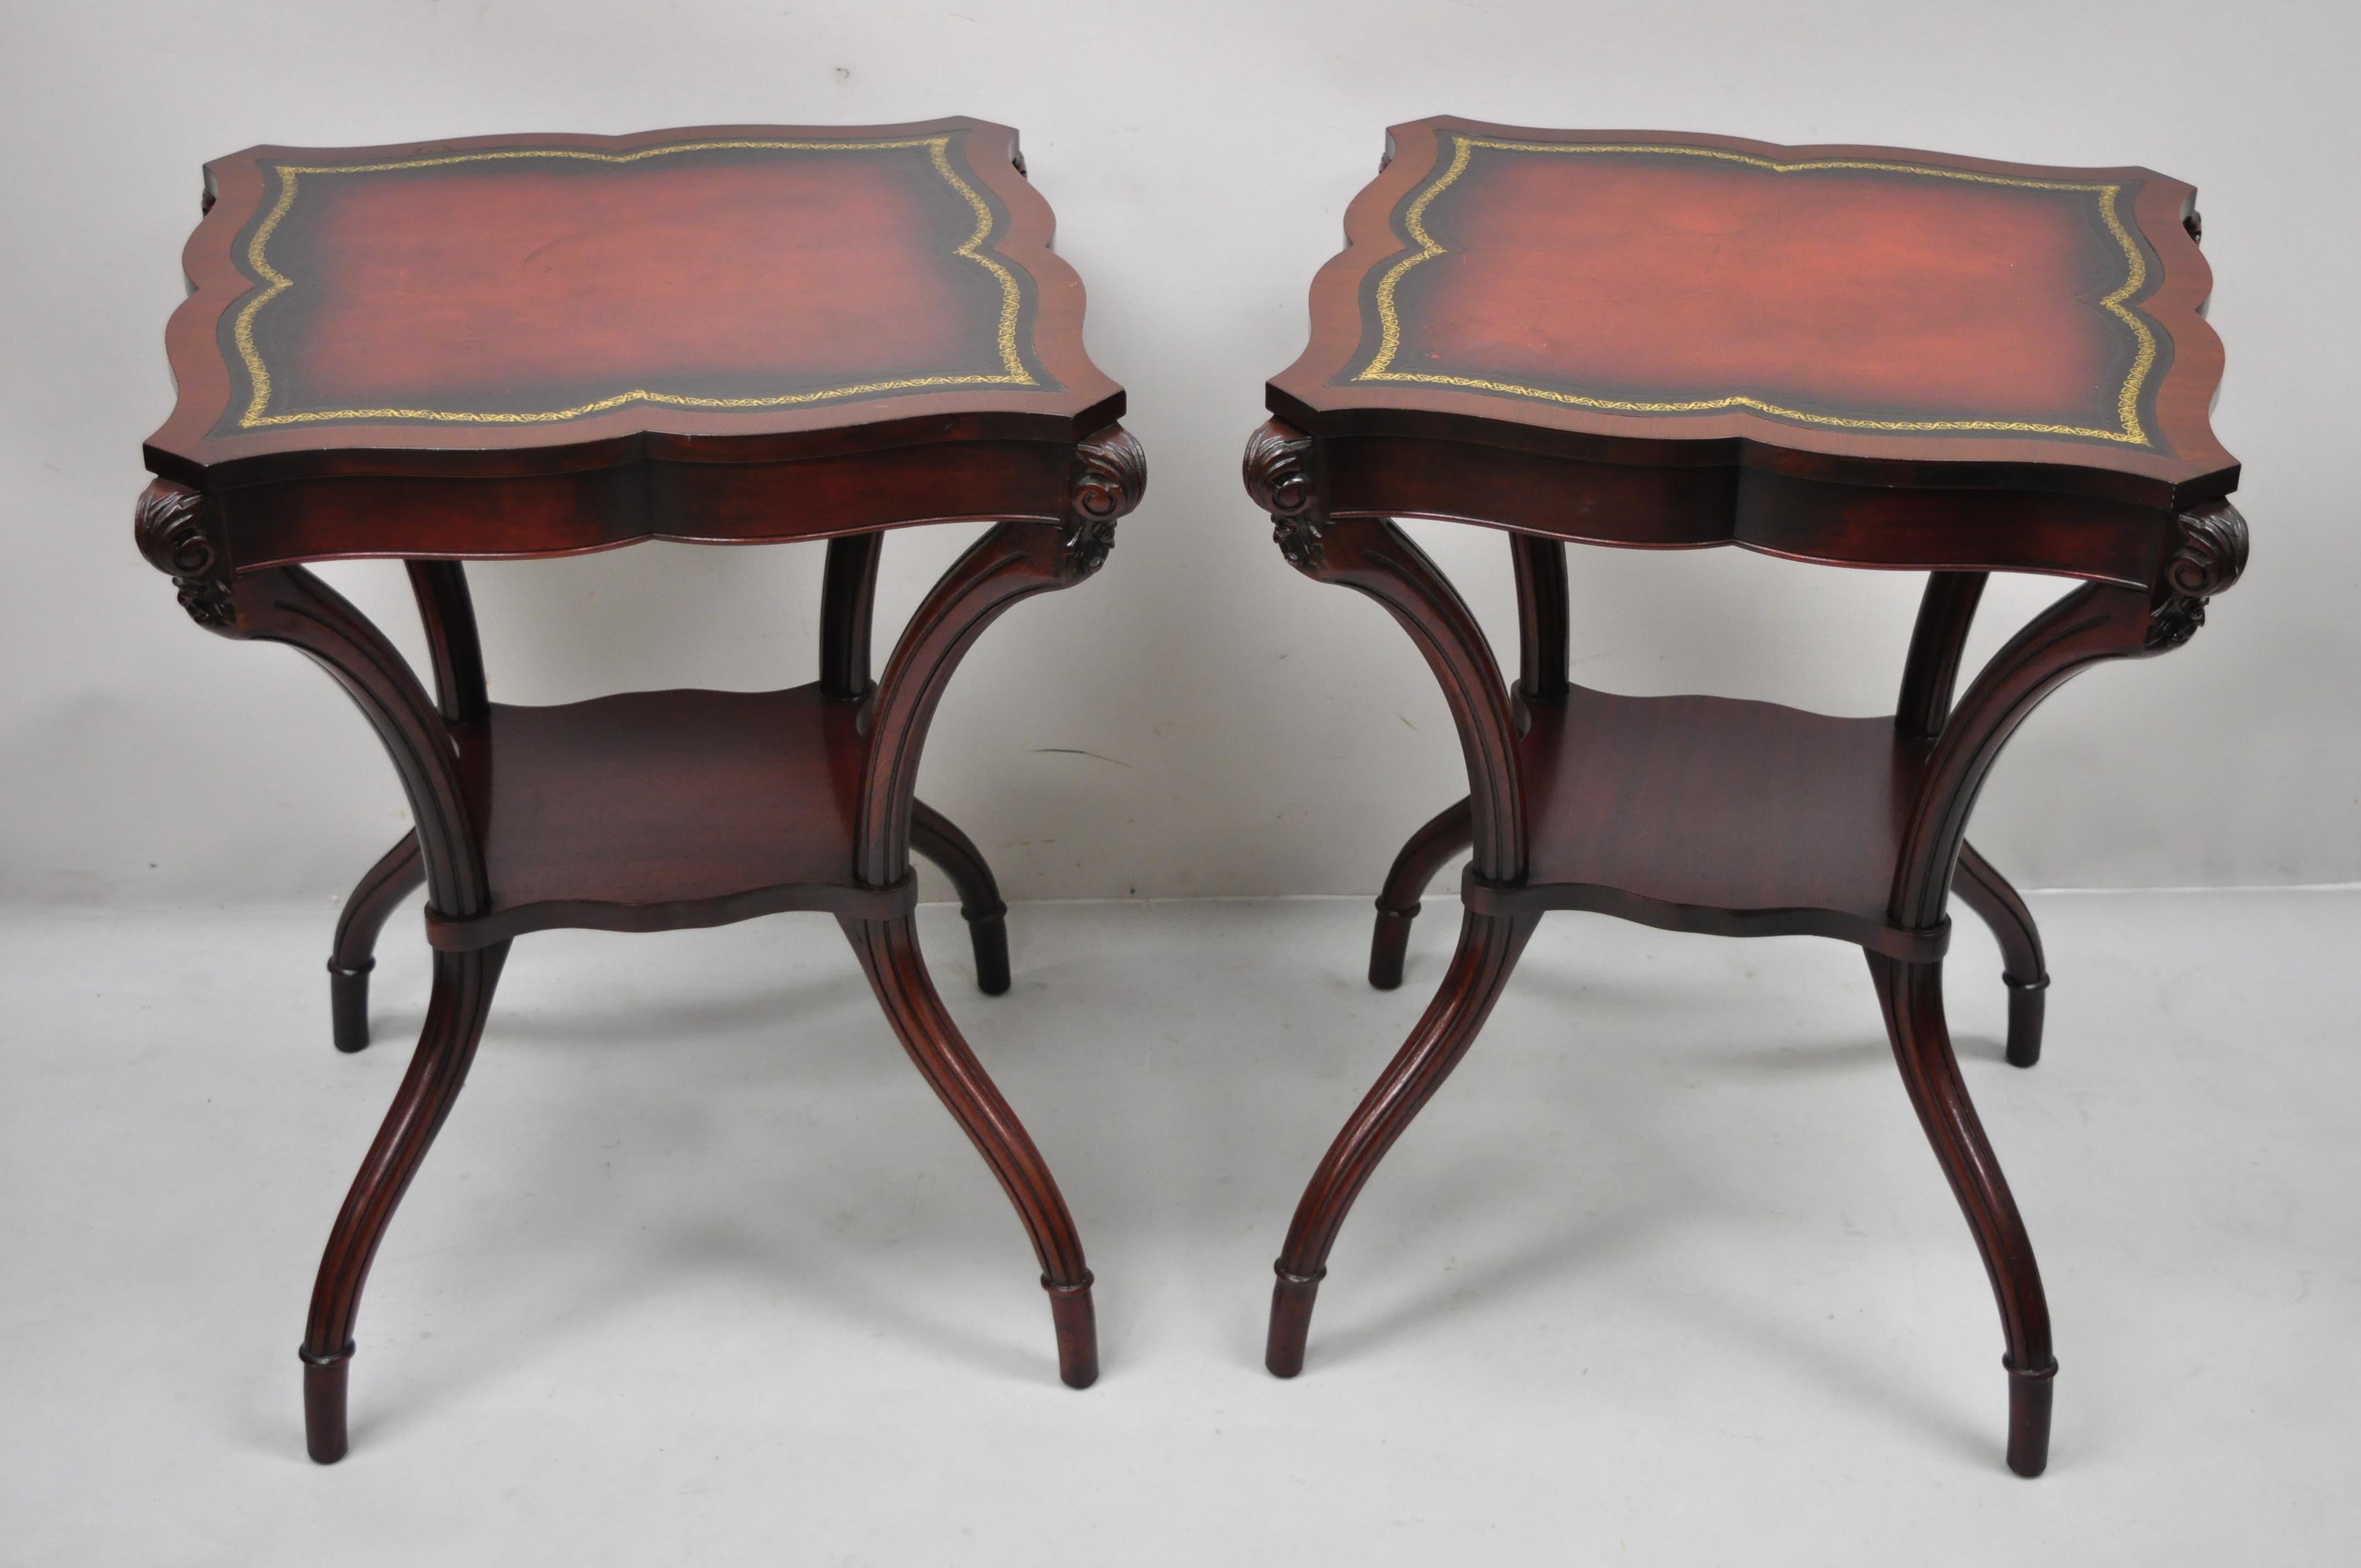 Vintage French Regency Style Red Leather Top Mahogany Lamp End Tables, a Pair For Sale 3